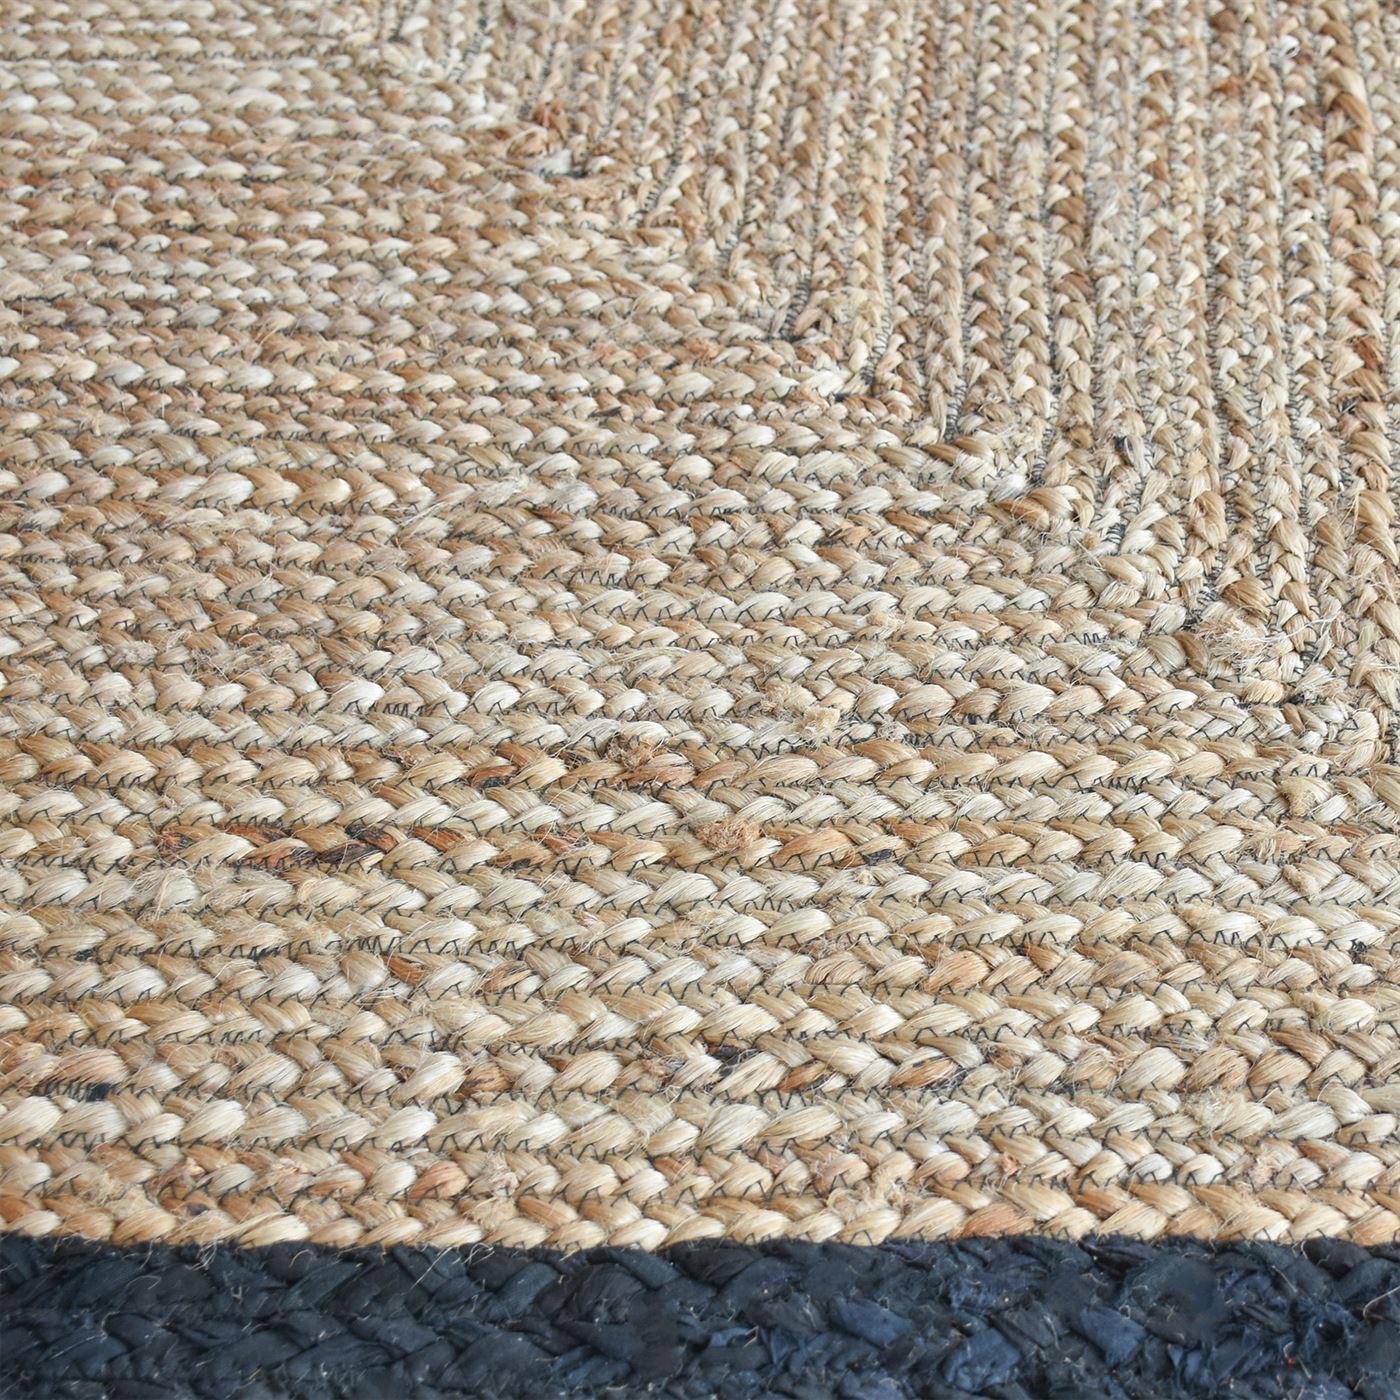 Area Rug, Bedroom Rug, Living Room Rug, Living Area Rug, Indian Rug, Office Carpet, Office Rug, Shop Rug Online, Hemp, Recycled Fabric, Charcoal, Natural, Hm Stitching, Flat Weave, Braided